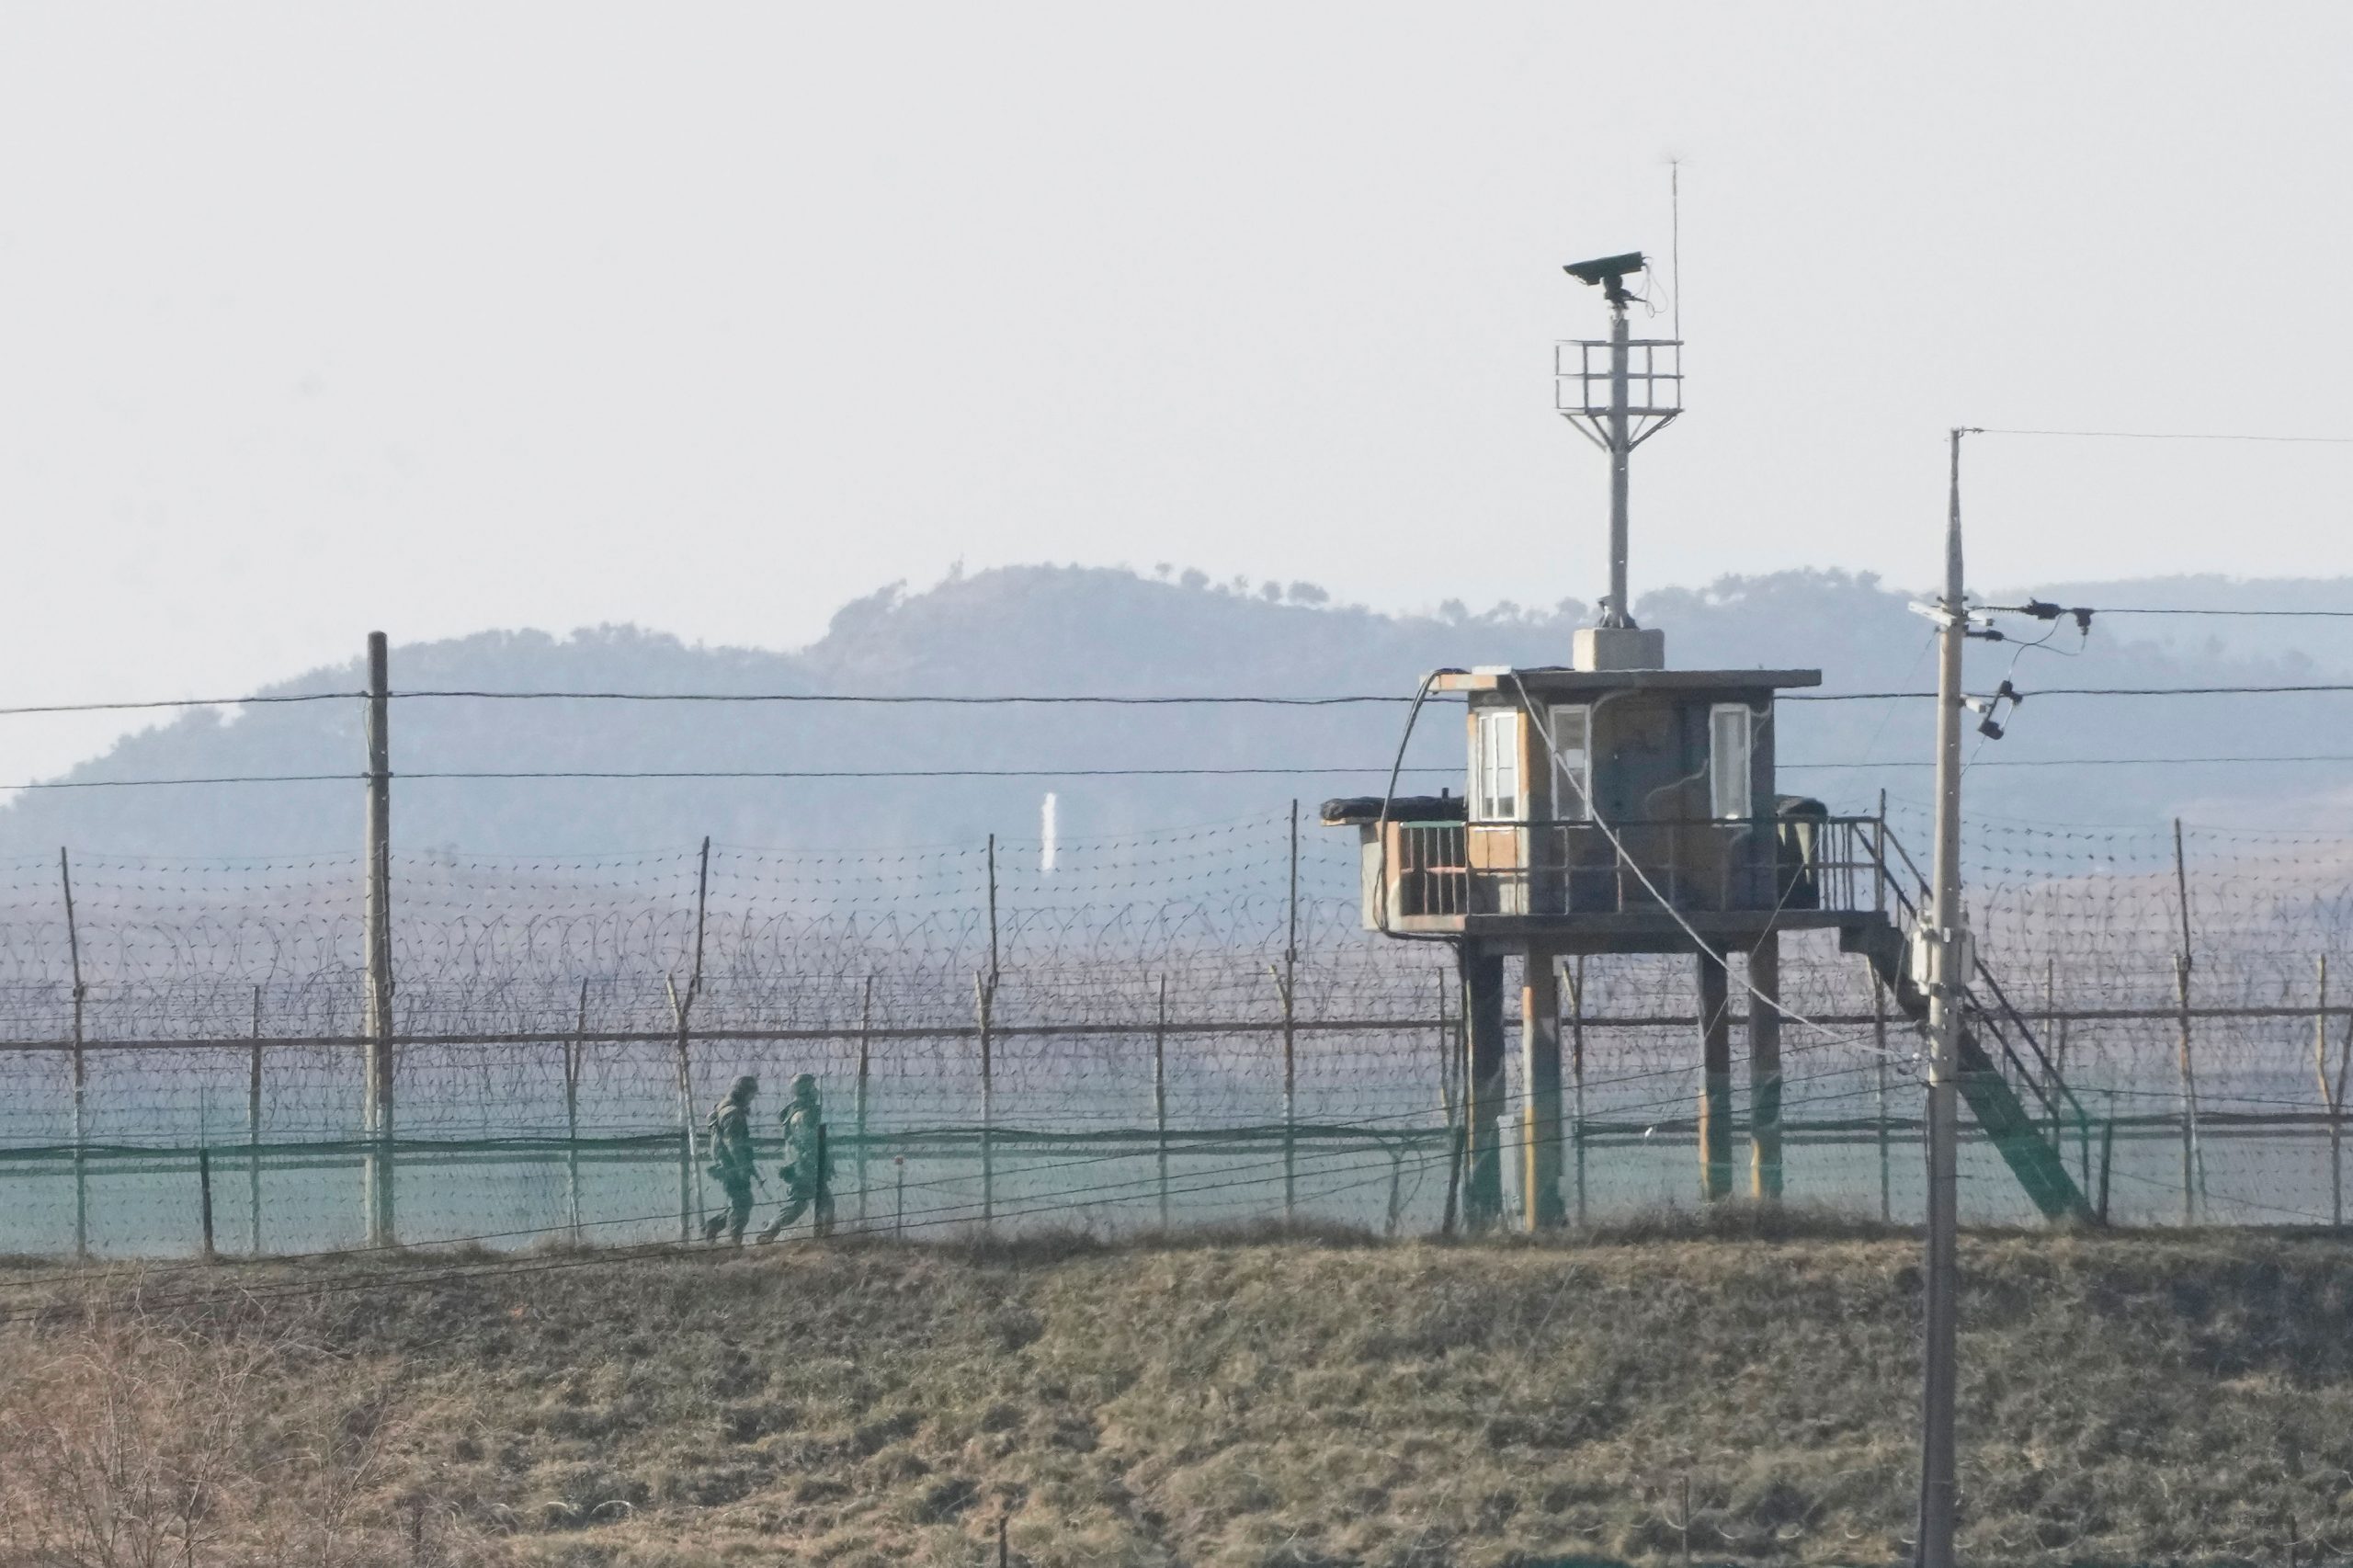 North Korean defected to South Korea a year back; climbed barbed wire fence to return